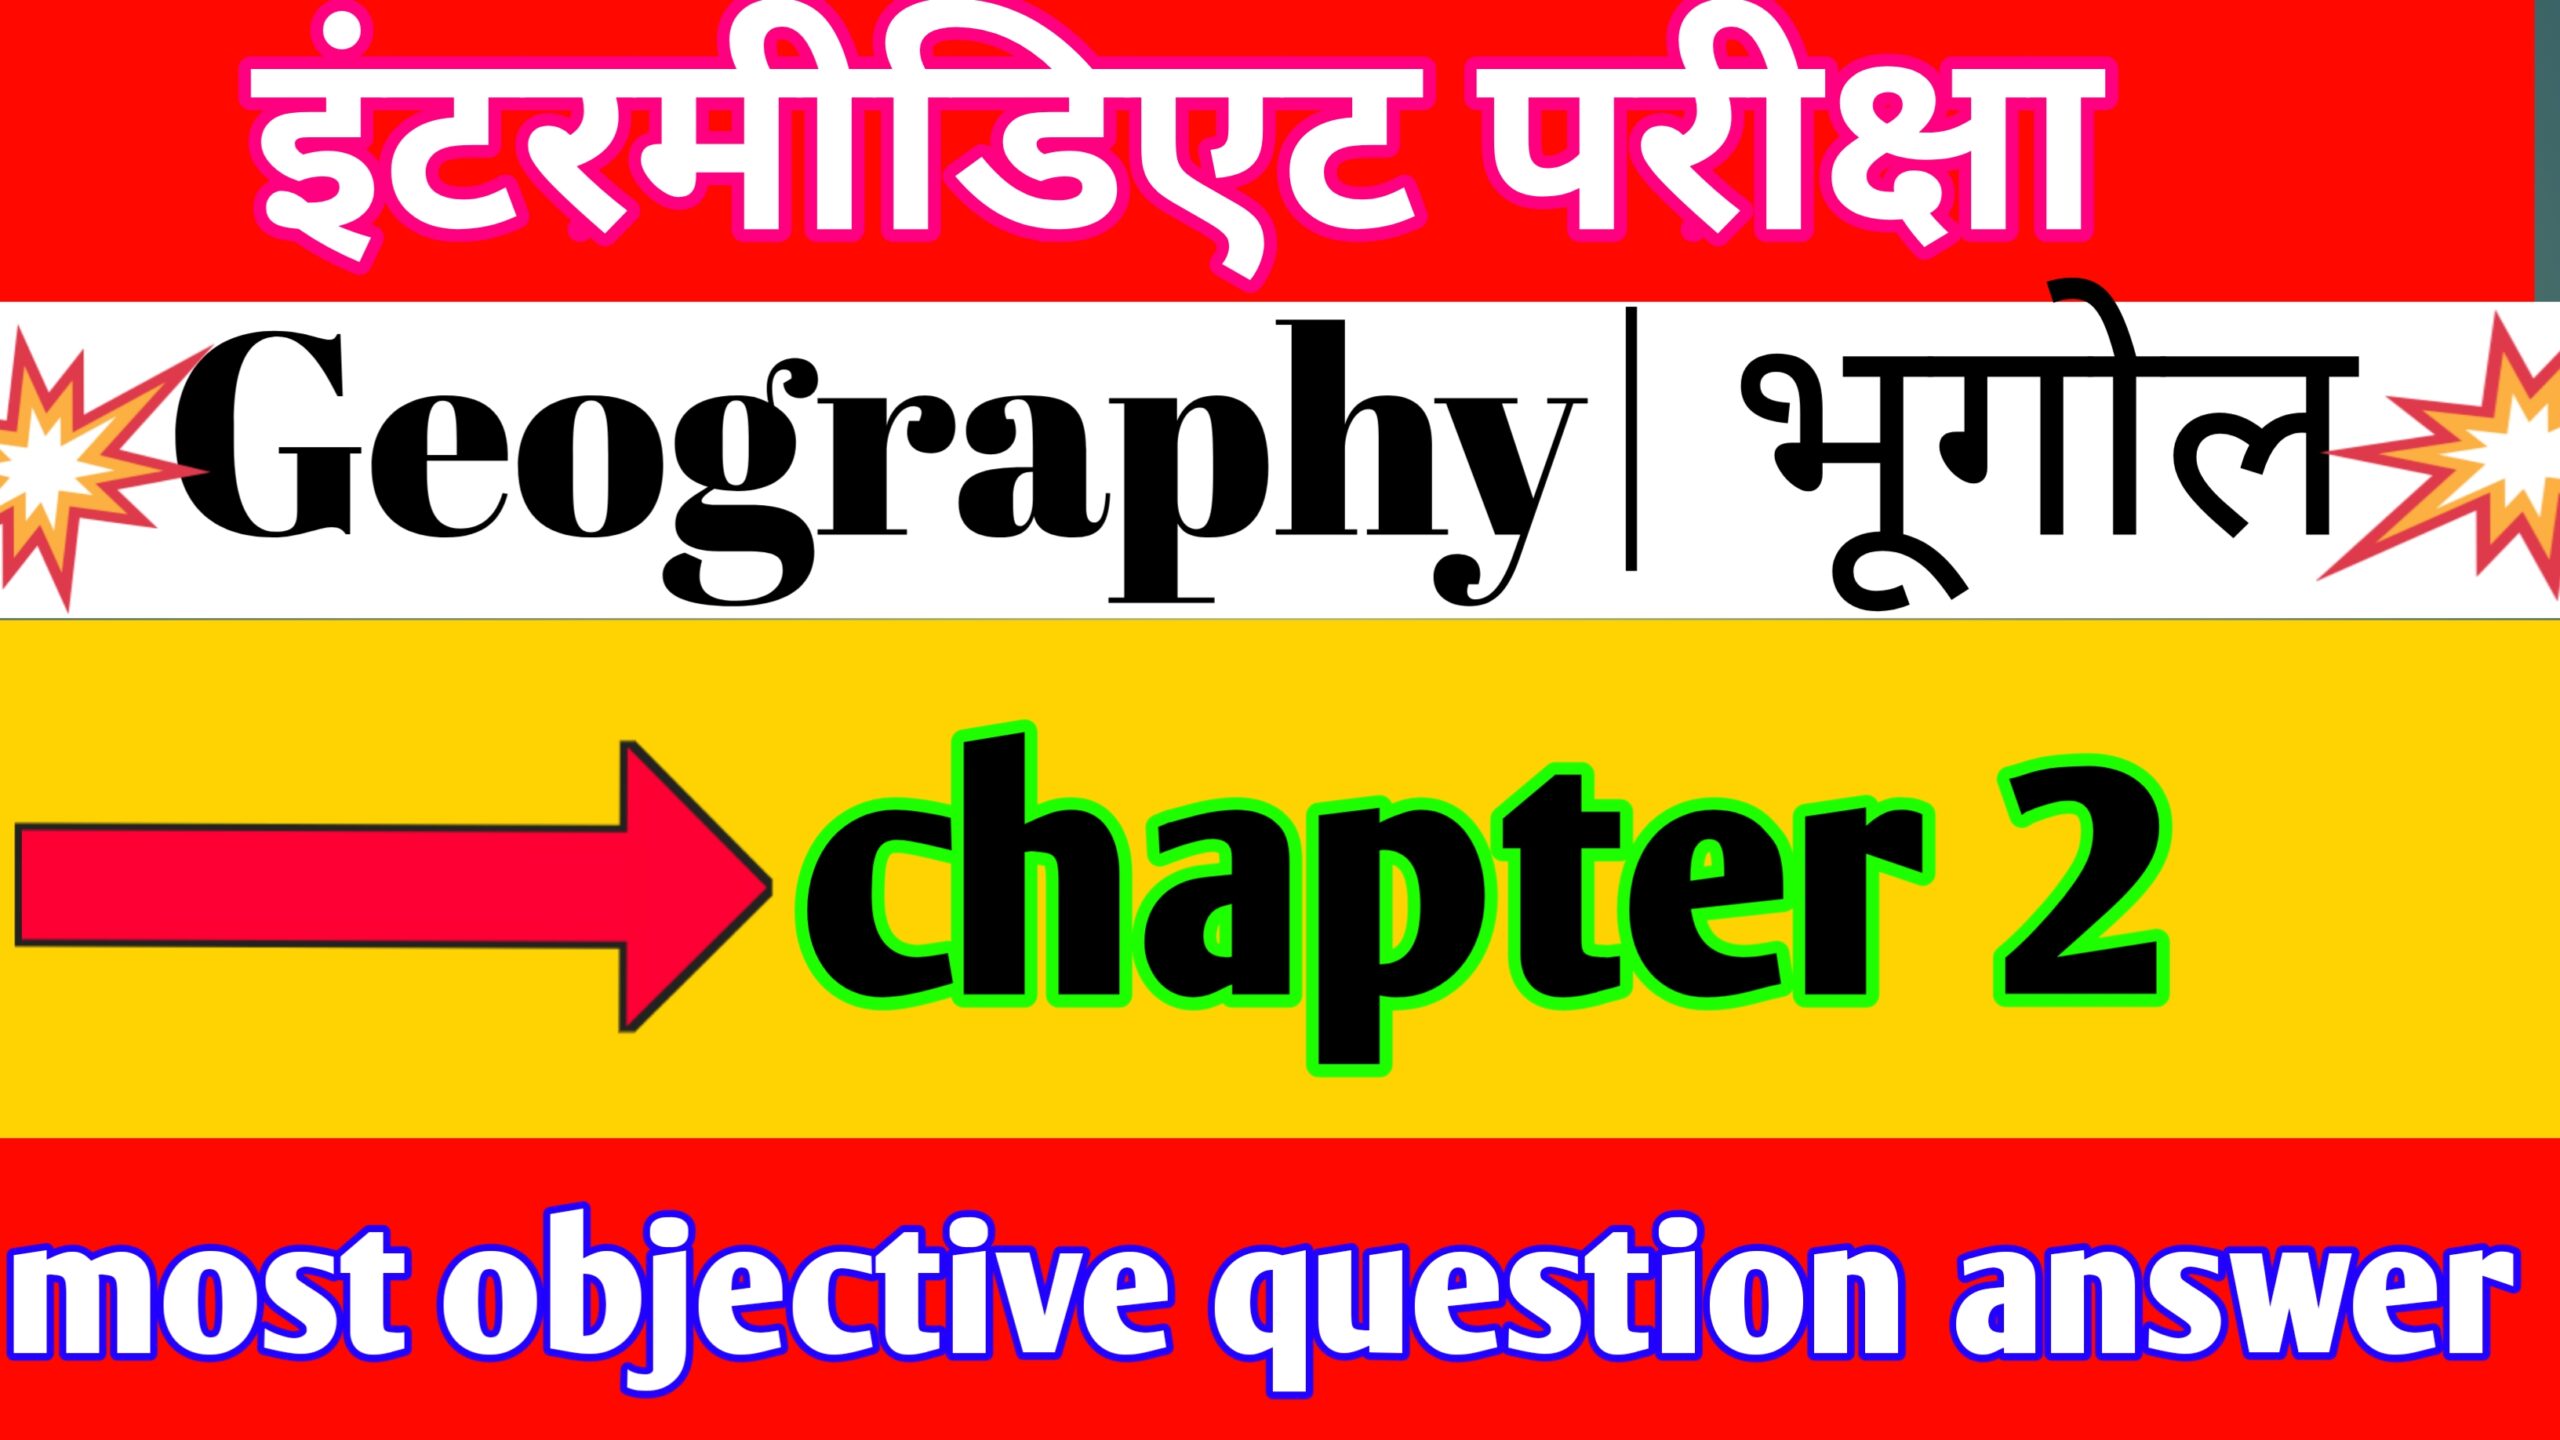 Geography Chapter 3 class 12